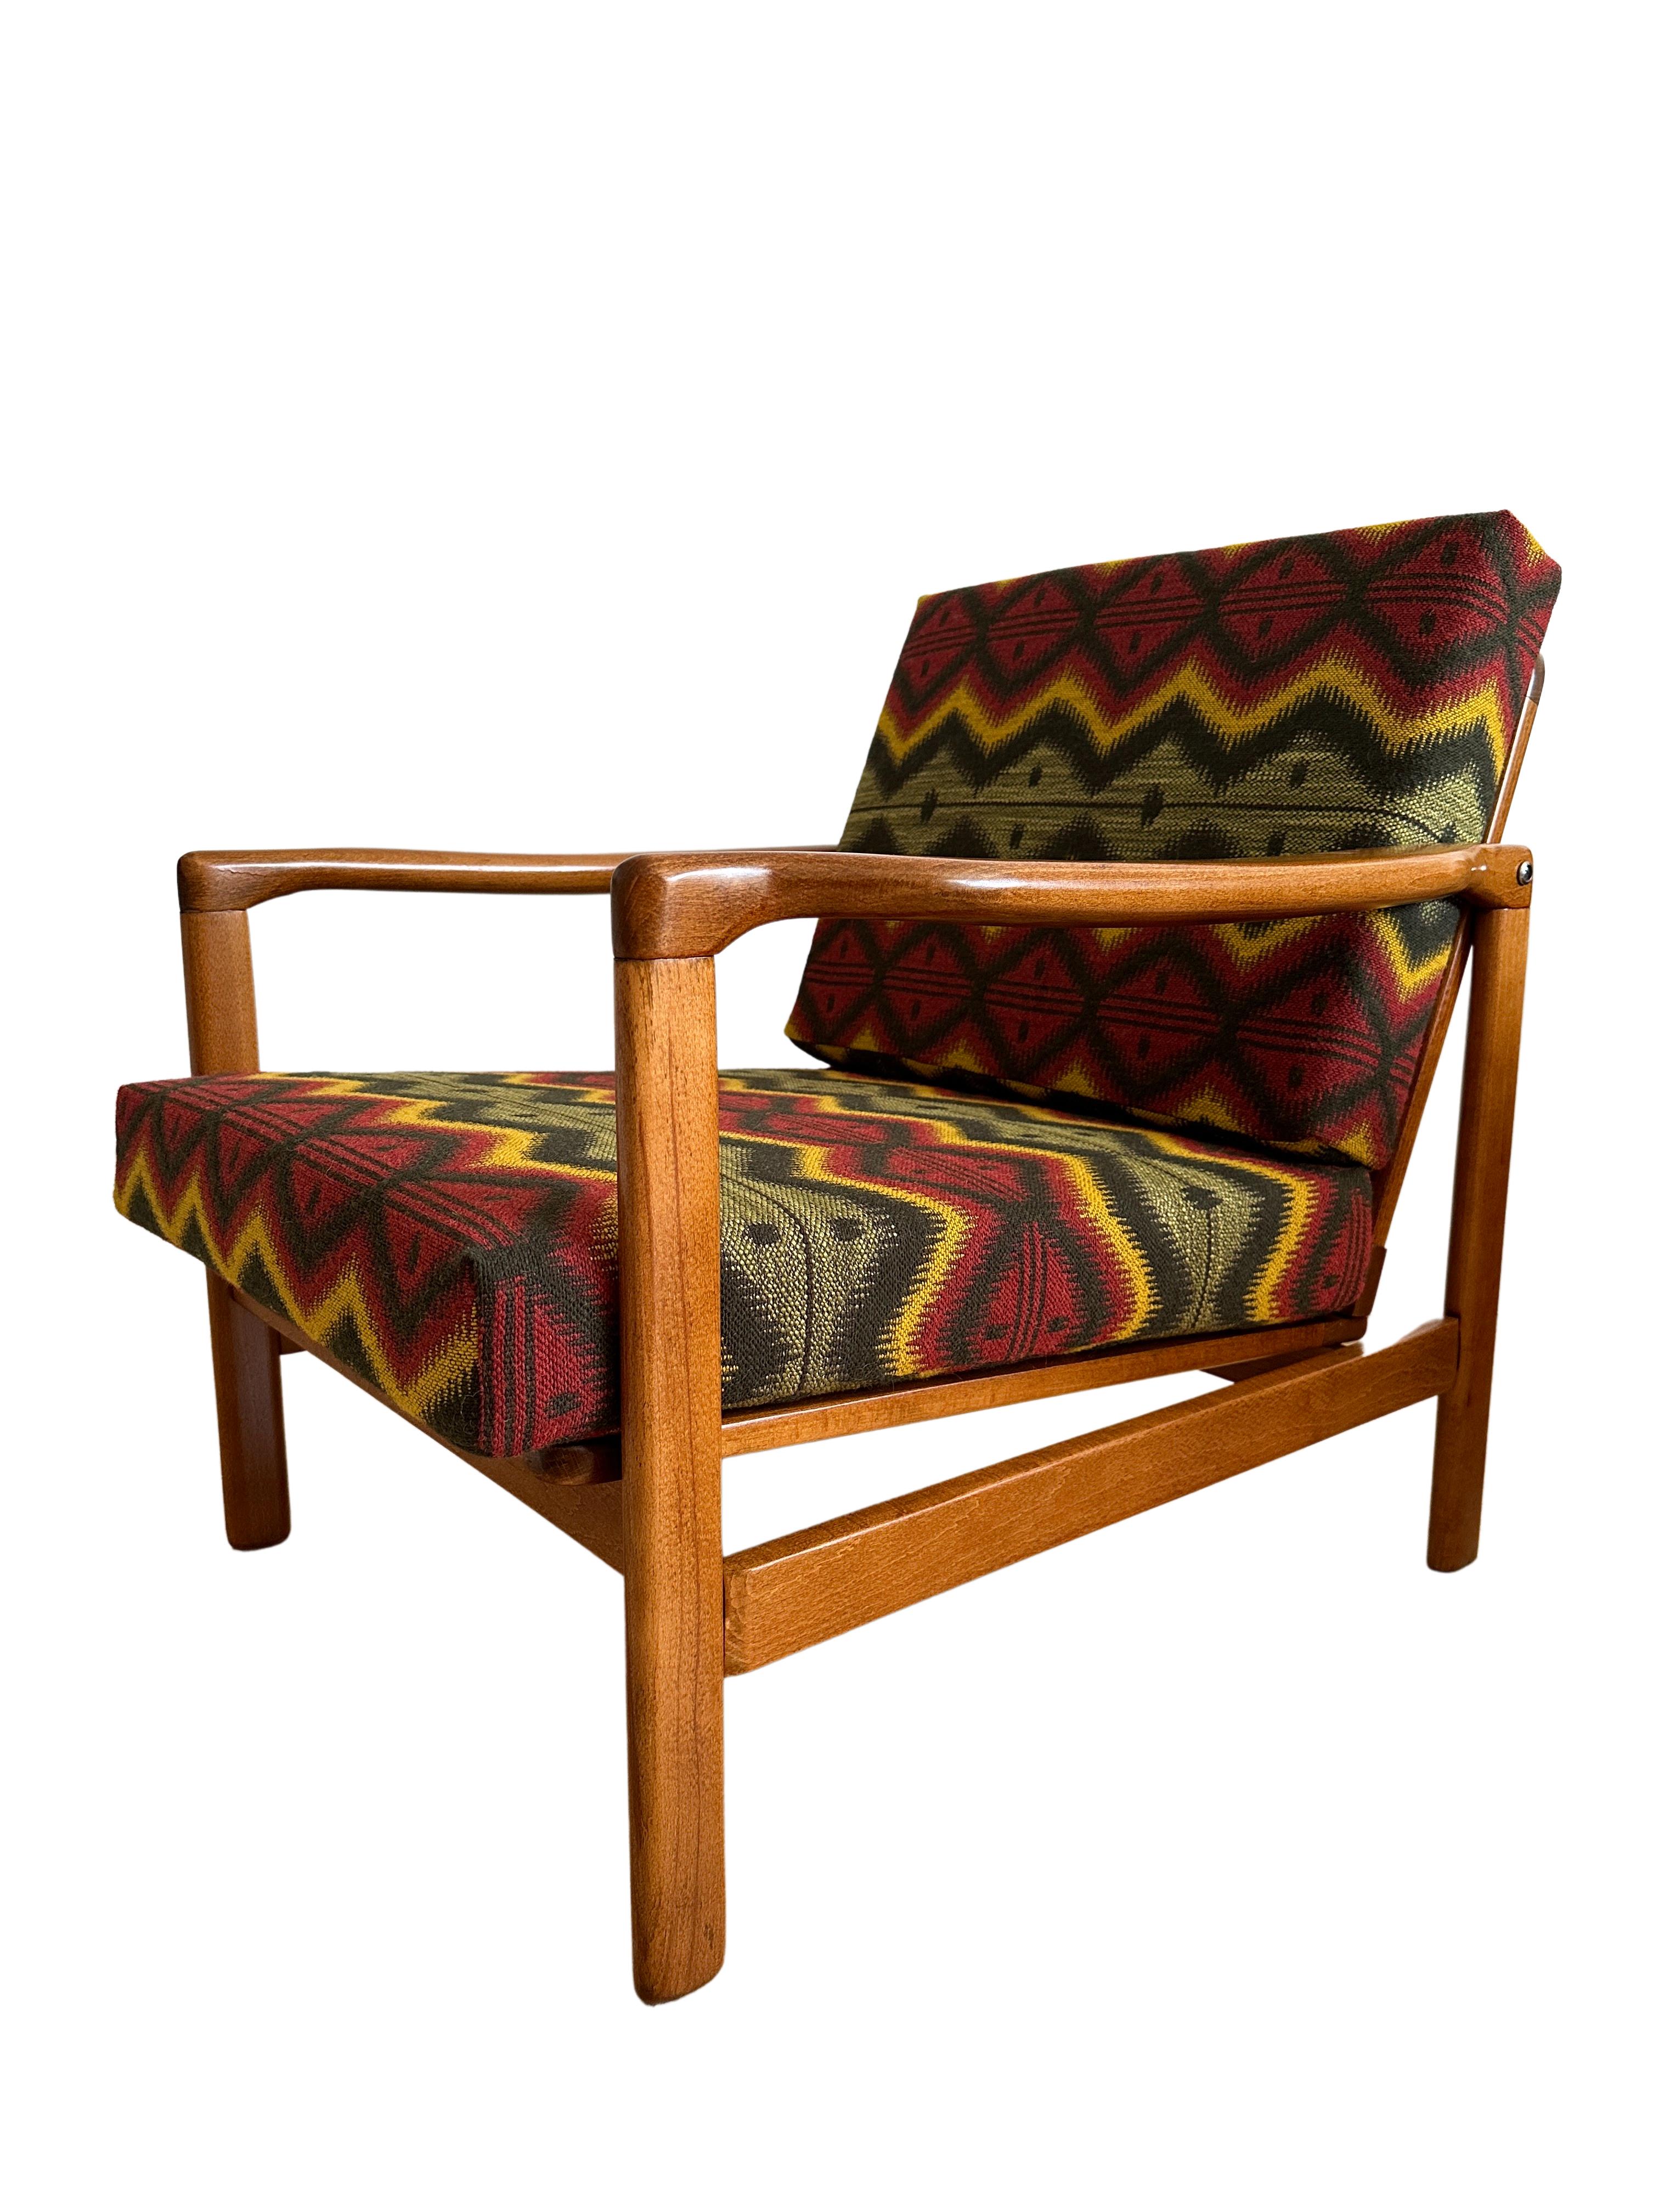 Midcentury Armchair by Zenon Bączyk, Mind the Gap Upholstery, Europe, 1960s In Excellent Condition For Sale In WARSZAWA, 14